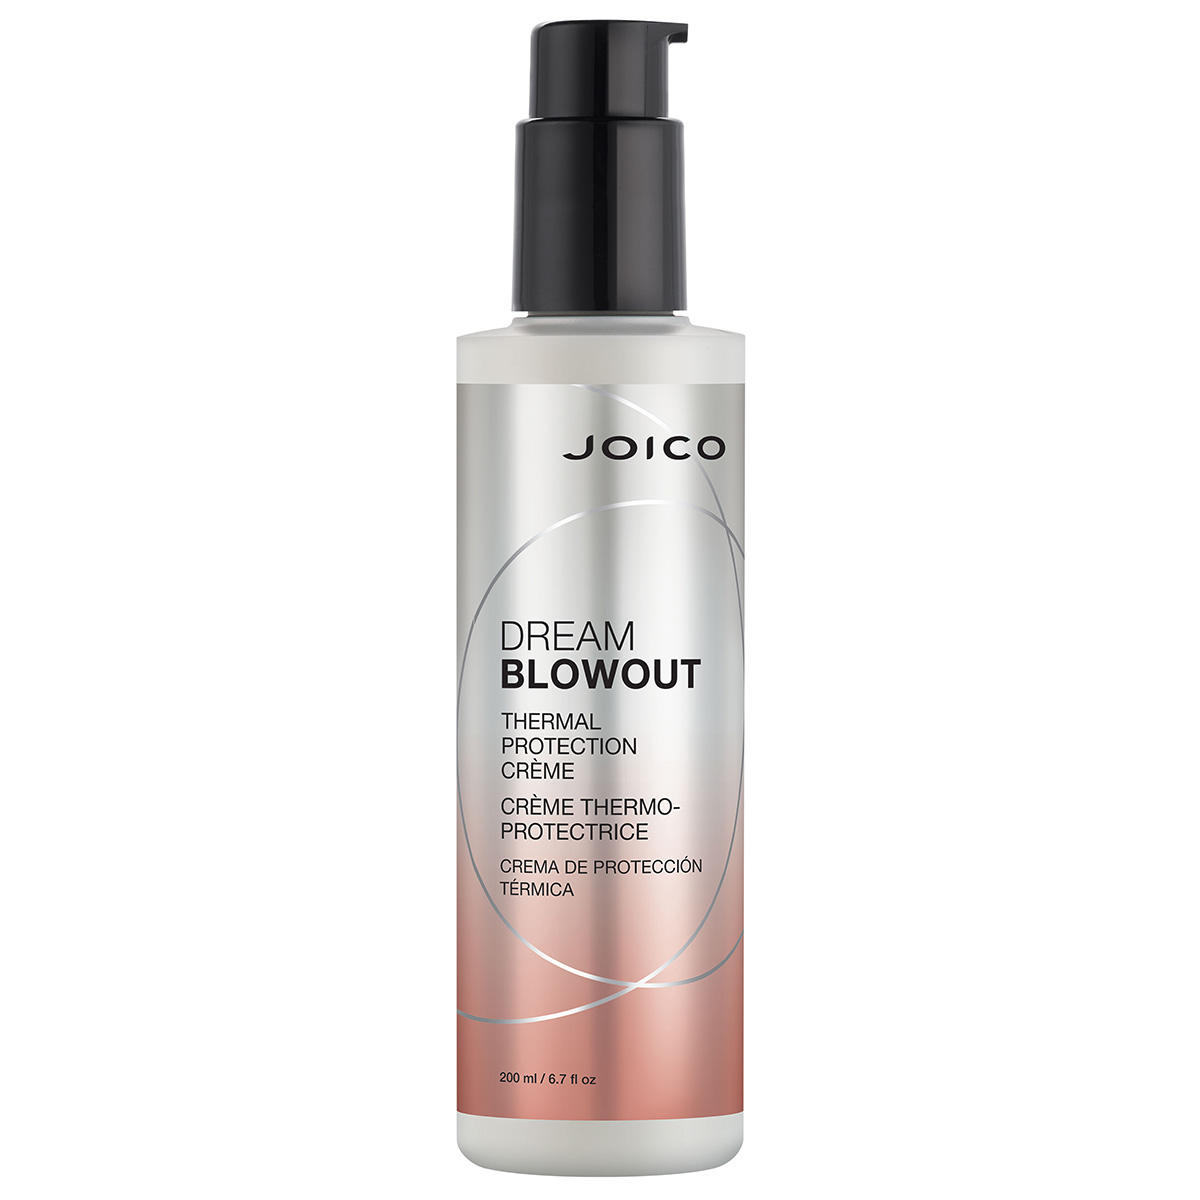 JOICO Dream Blowout Thermal Protection Crème 200 ml - 1